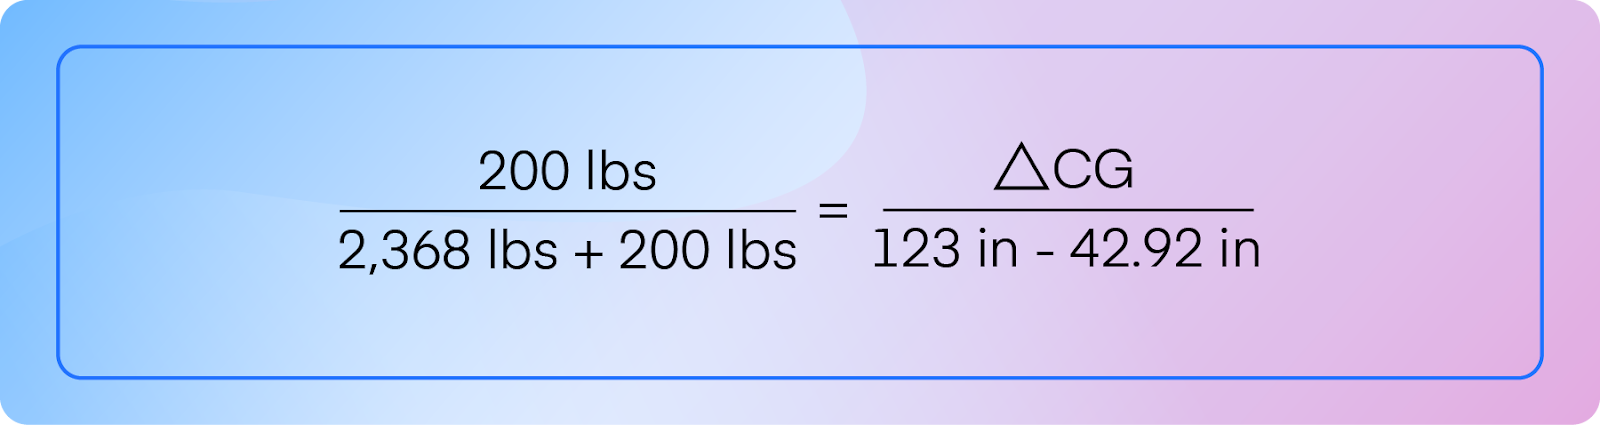 Calculating weight added formula, part 1.